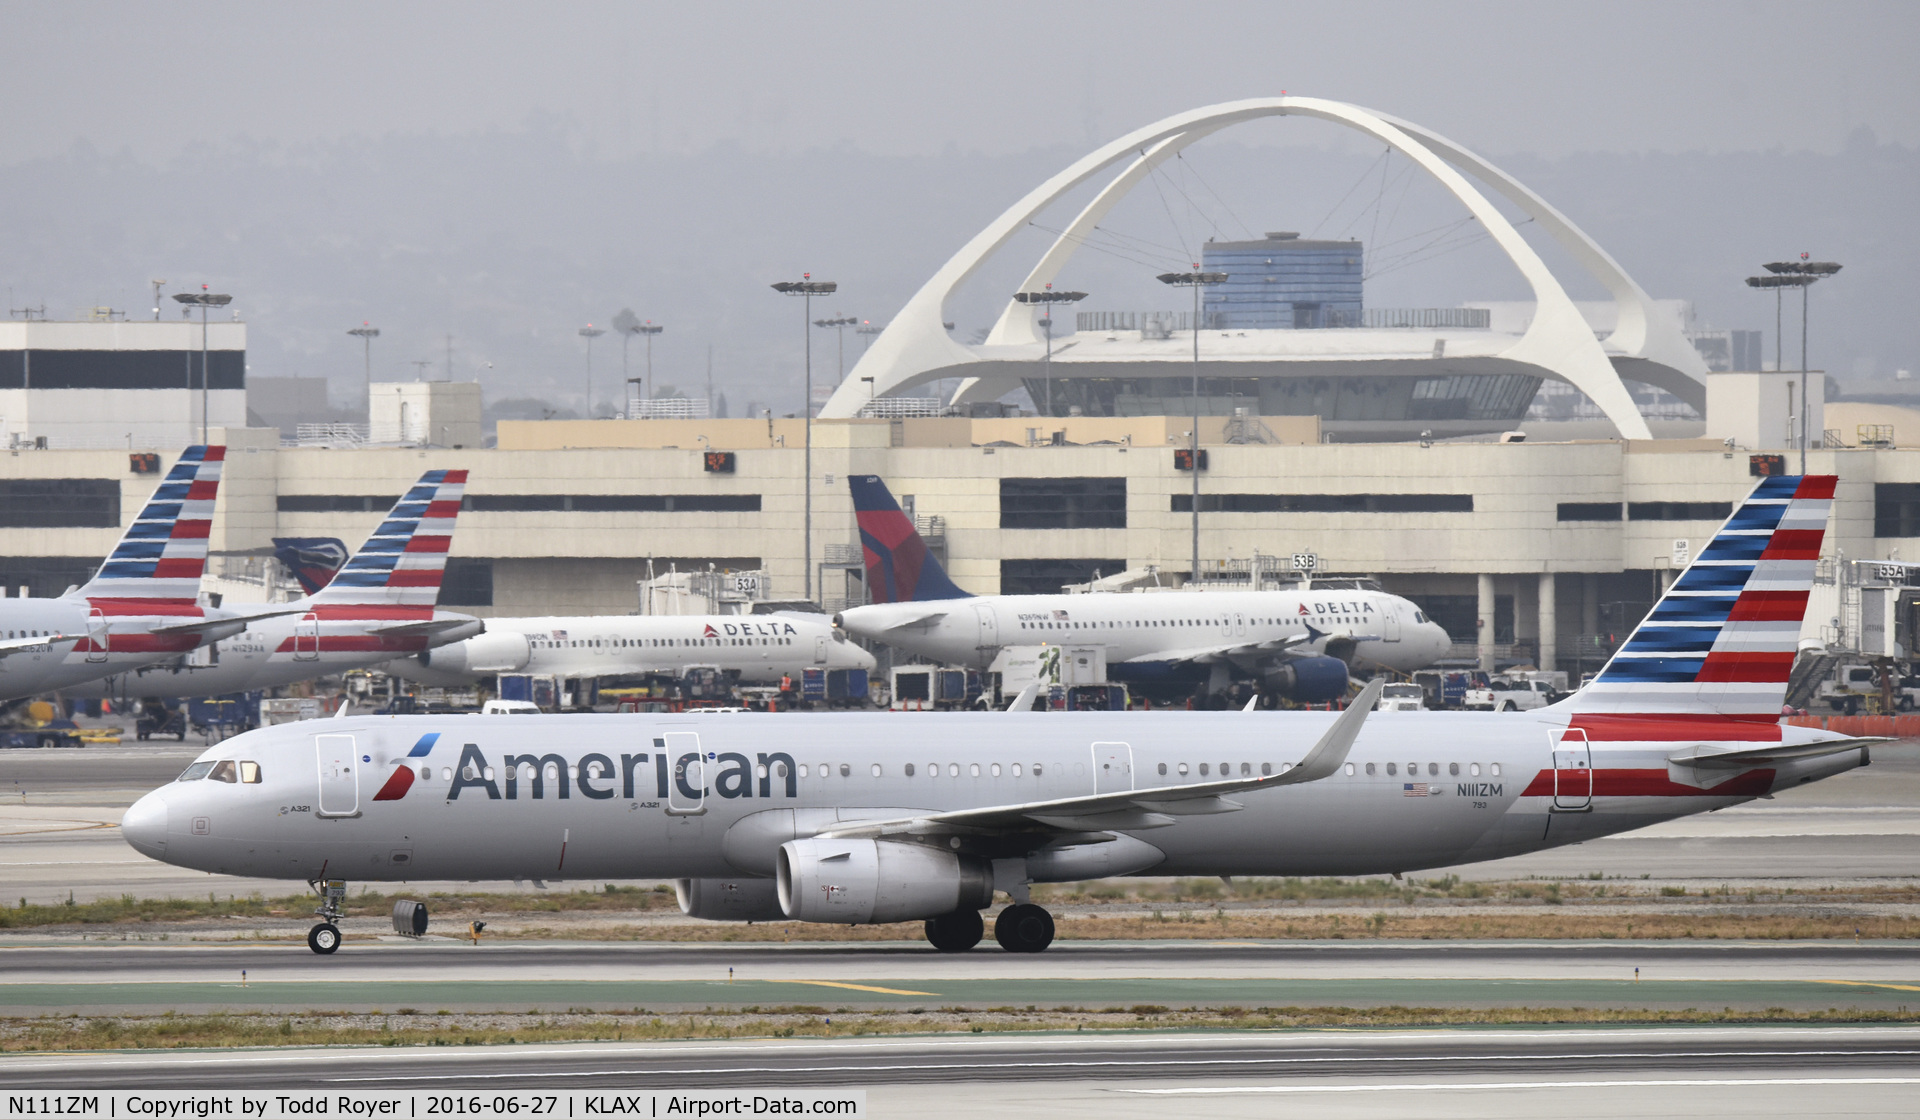 N111ZM, 2014 Airbus A321-231 C/N 5983, Arriving at LAX on 25L